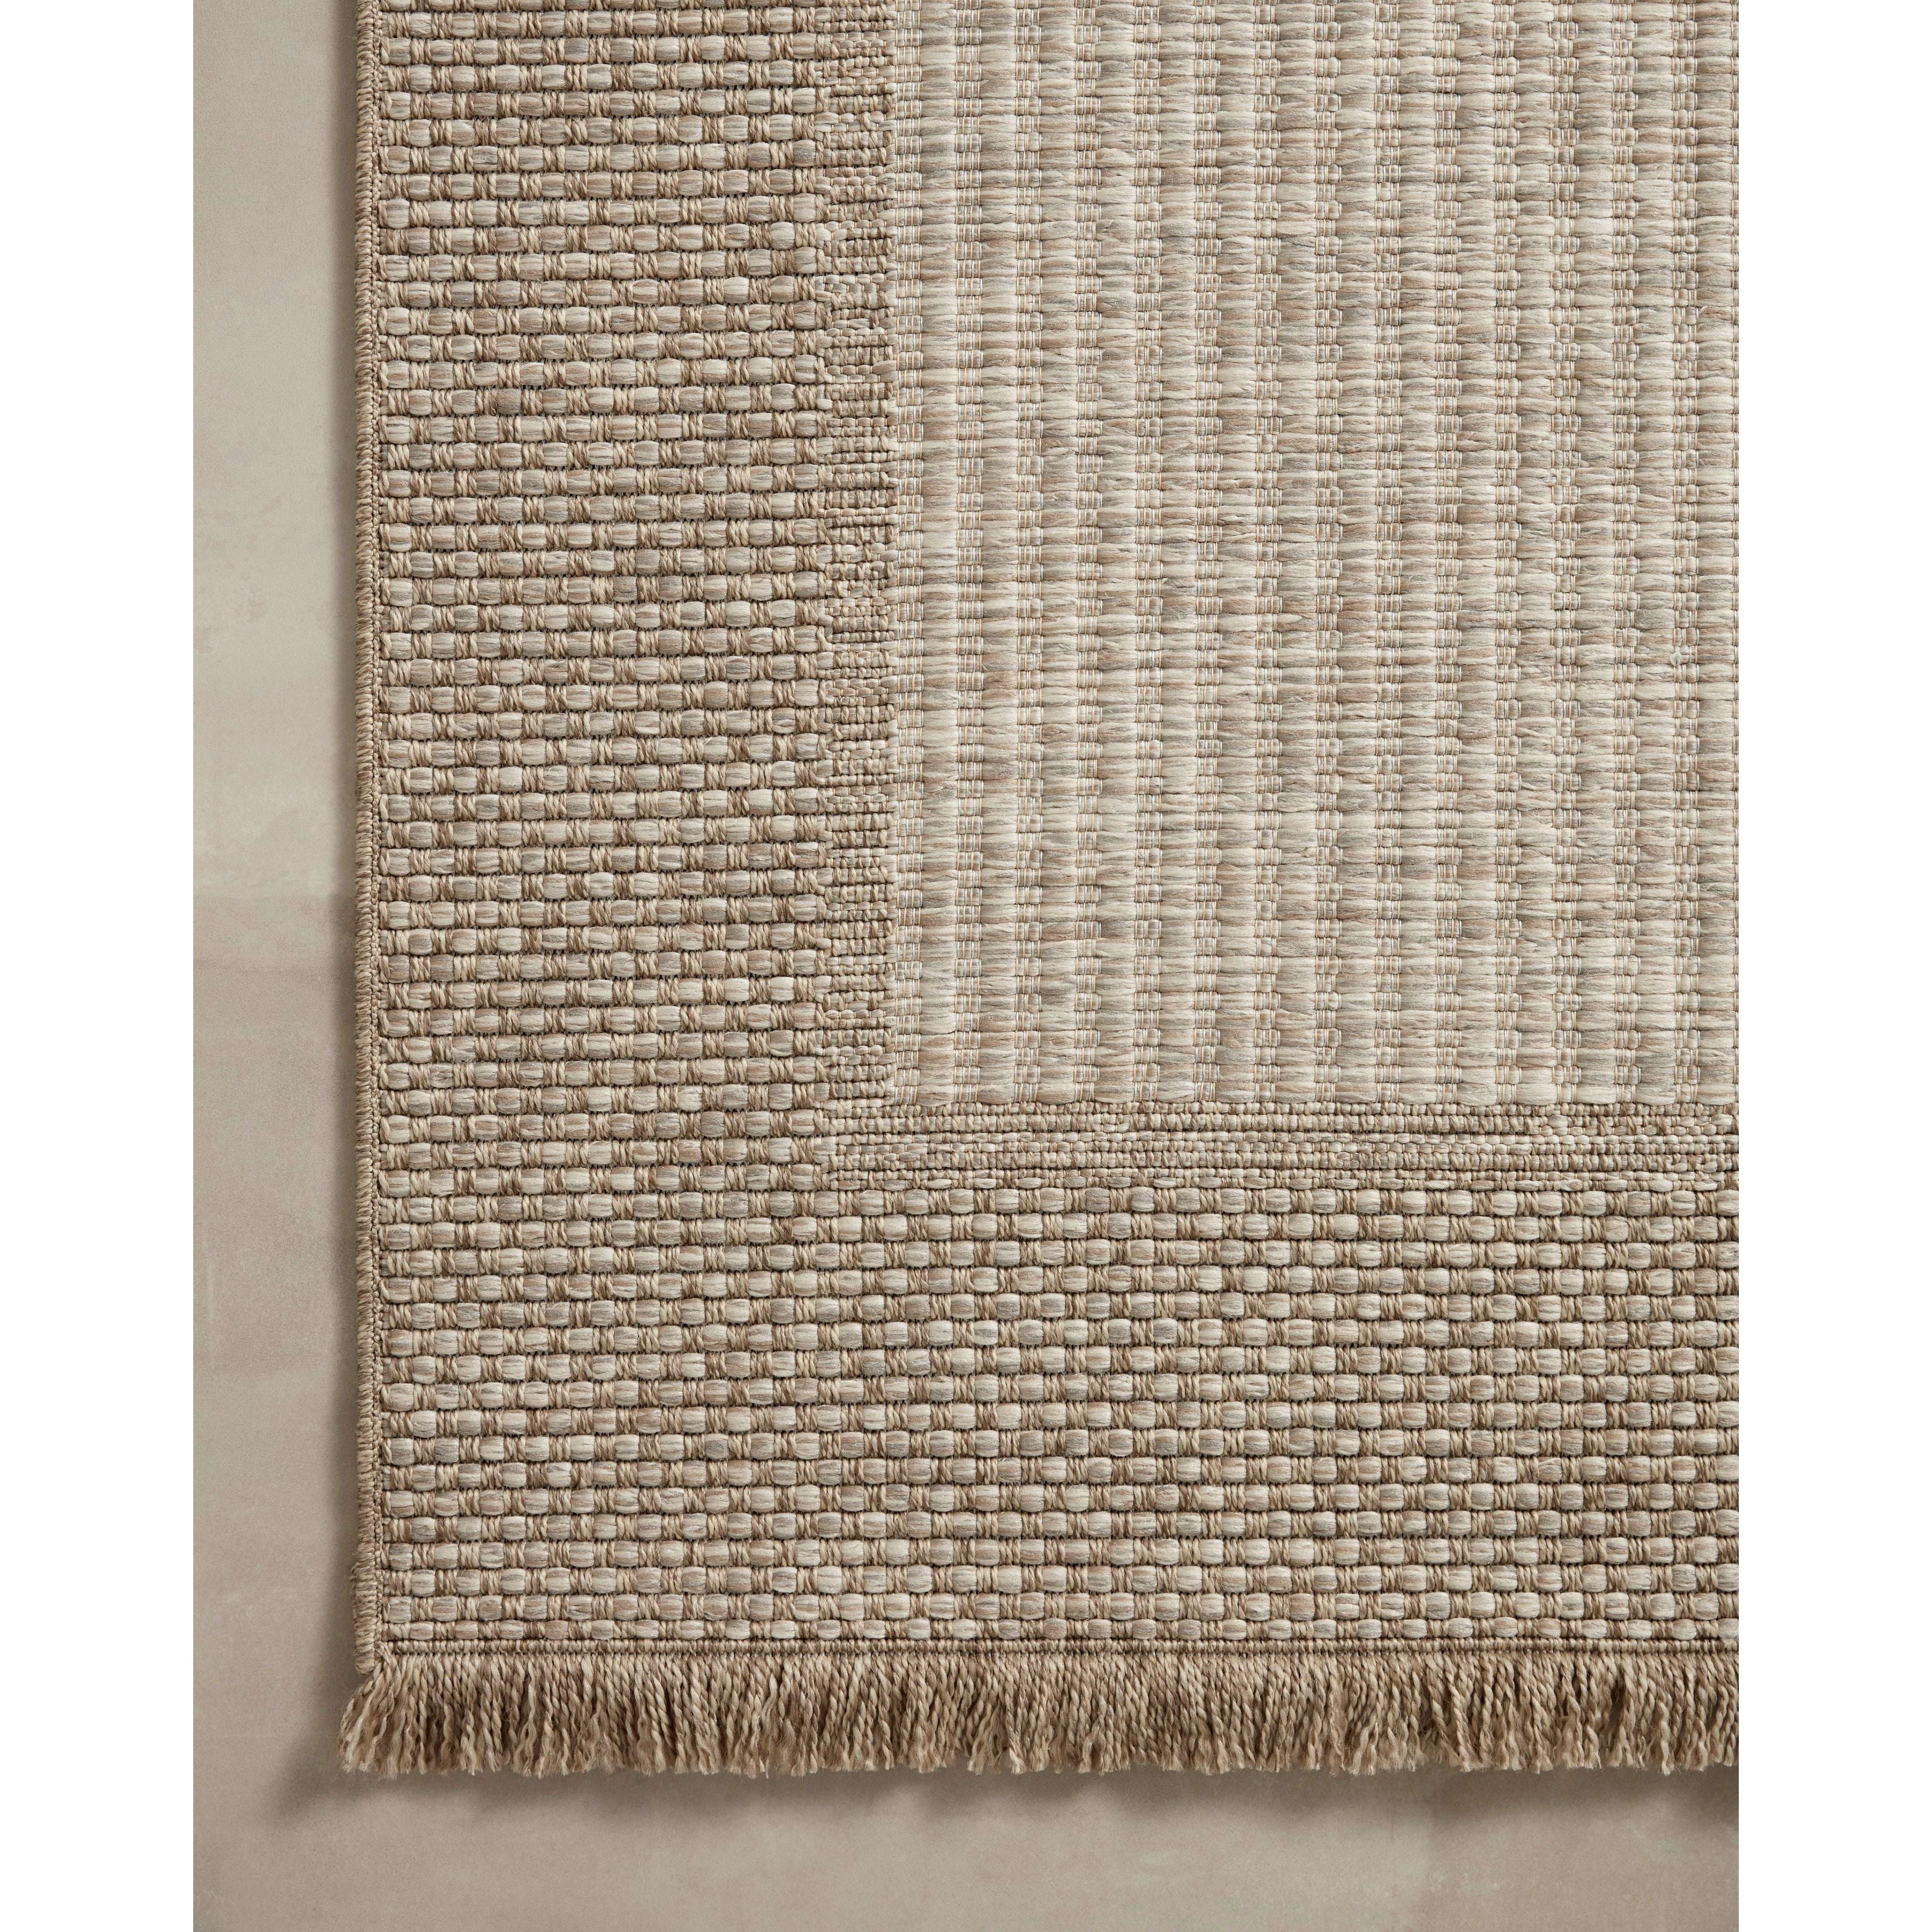 Made for sunny days ahead, the Dawn Collection is an indoor/outdoor rug that looks like a woven sisal rug but is power-loomed of 100% polypropylene, which makes it water- and mildew-resistant (so it's ready for rainy days ahead, too). Amethyst Home provides interior design, new home construction design consulting, vintage area rugs, and lighting in the Salt Lake City metro area.